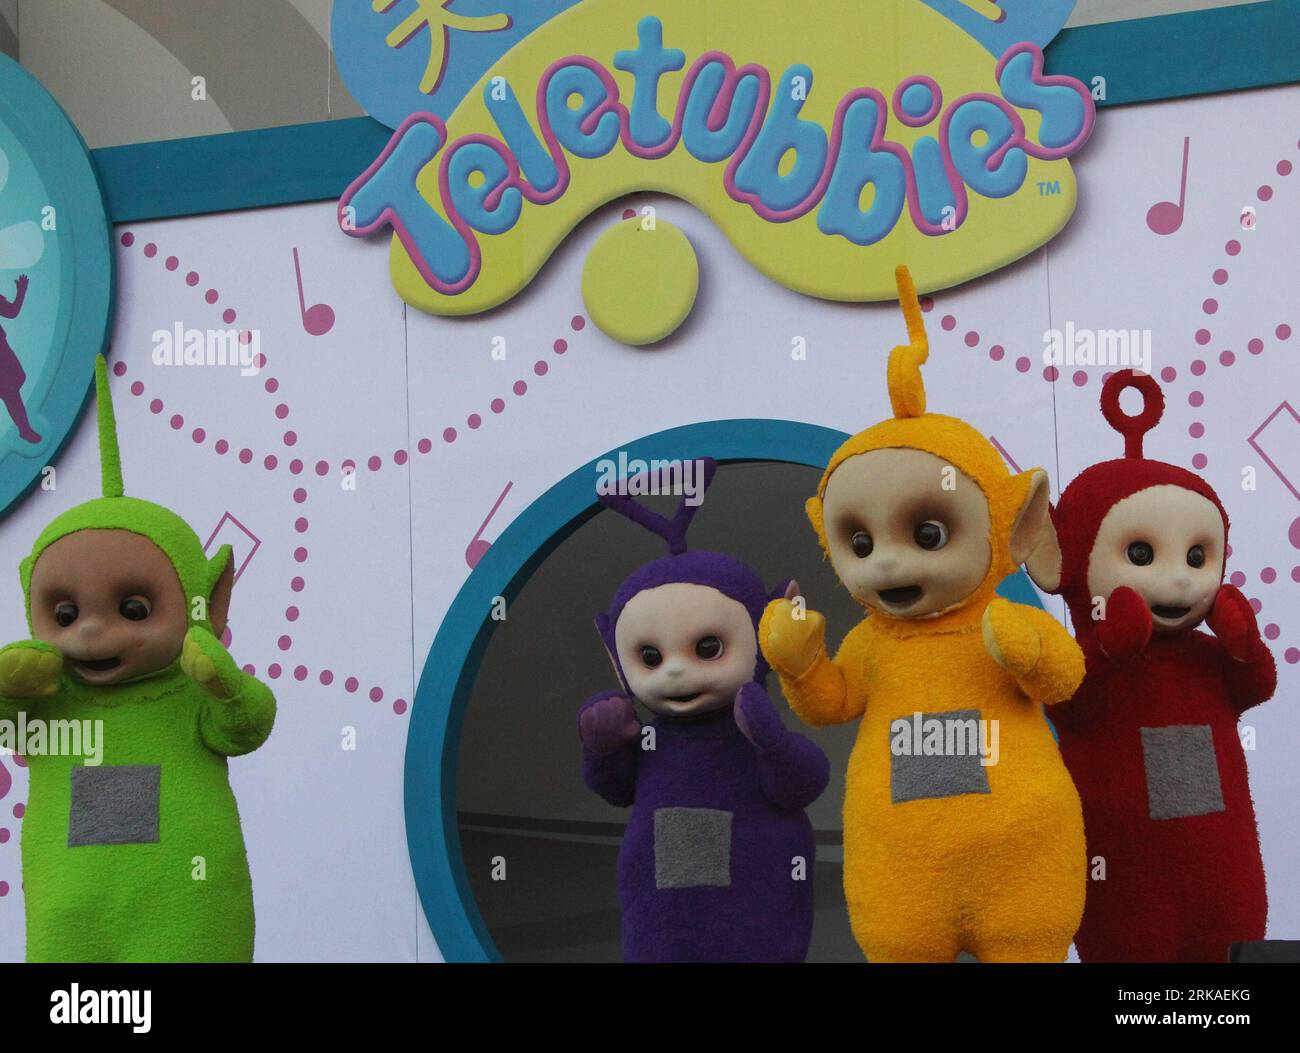 Bildnummer: 54335158  Datum: 23.08.2010  Copyright: imago/Xinhua (100823) -- SHANGHAI, Aug. 23, 2010 (Xinhua) -- Britain s Teletubbies (L-R) Dipsy, Tinky-Winky, Laa-Laa, and Po perform during their first performance at the park of the 2010 World Expo in Shanghai, east China, Aug. 23, 2010. Teletubbies presented a dancing show for the tourists of the World Expo Monday. (Xinhua/Wang Yongji) (wyo) WORLD EXPO-SHANGHAI-TELETUBBIES-PERFORMANCE (CN) PUBLICATIONxNOTxINxCHN Gesellschaft Kultur Wirtschaft EXPO Shanghai TV Fernsehen Kindersendung People kbdig xdp premiumd xint 2010 quer     Bildnummer 54 Stock Photo